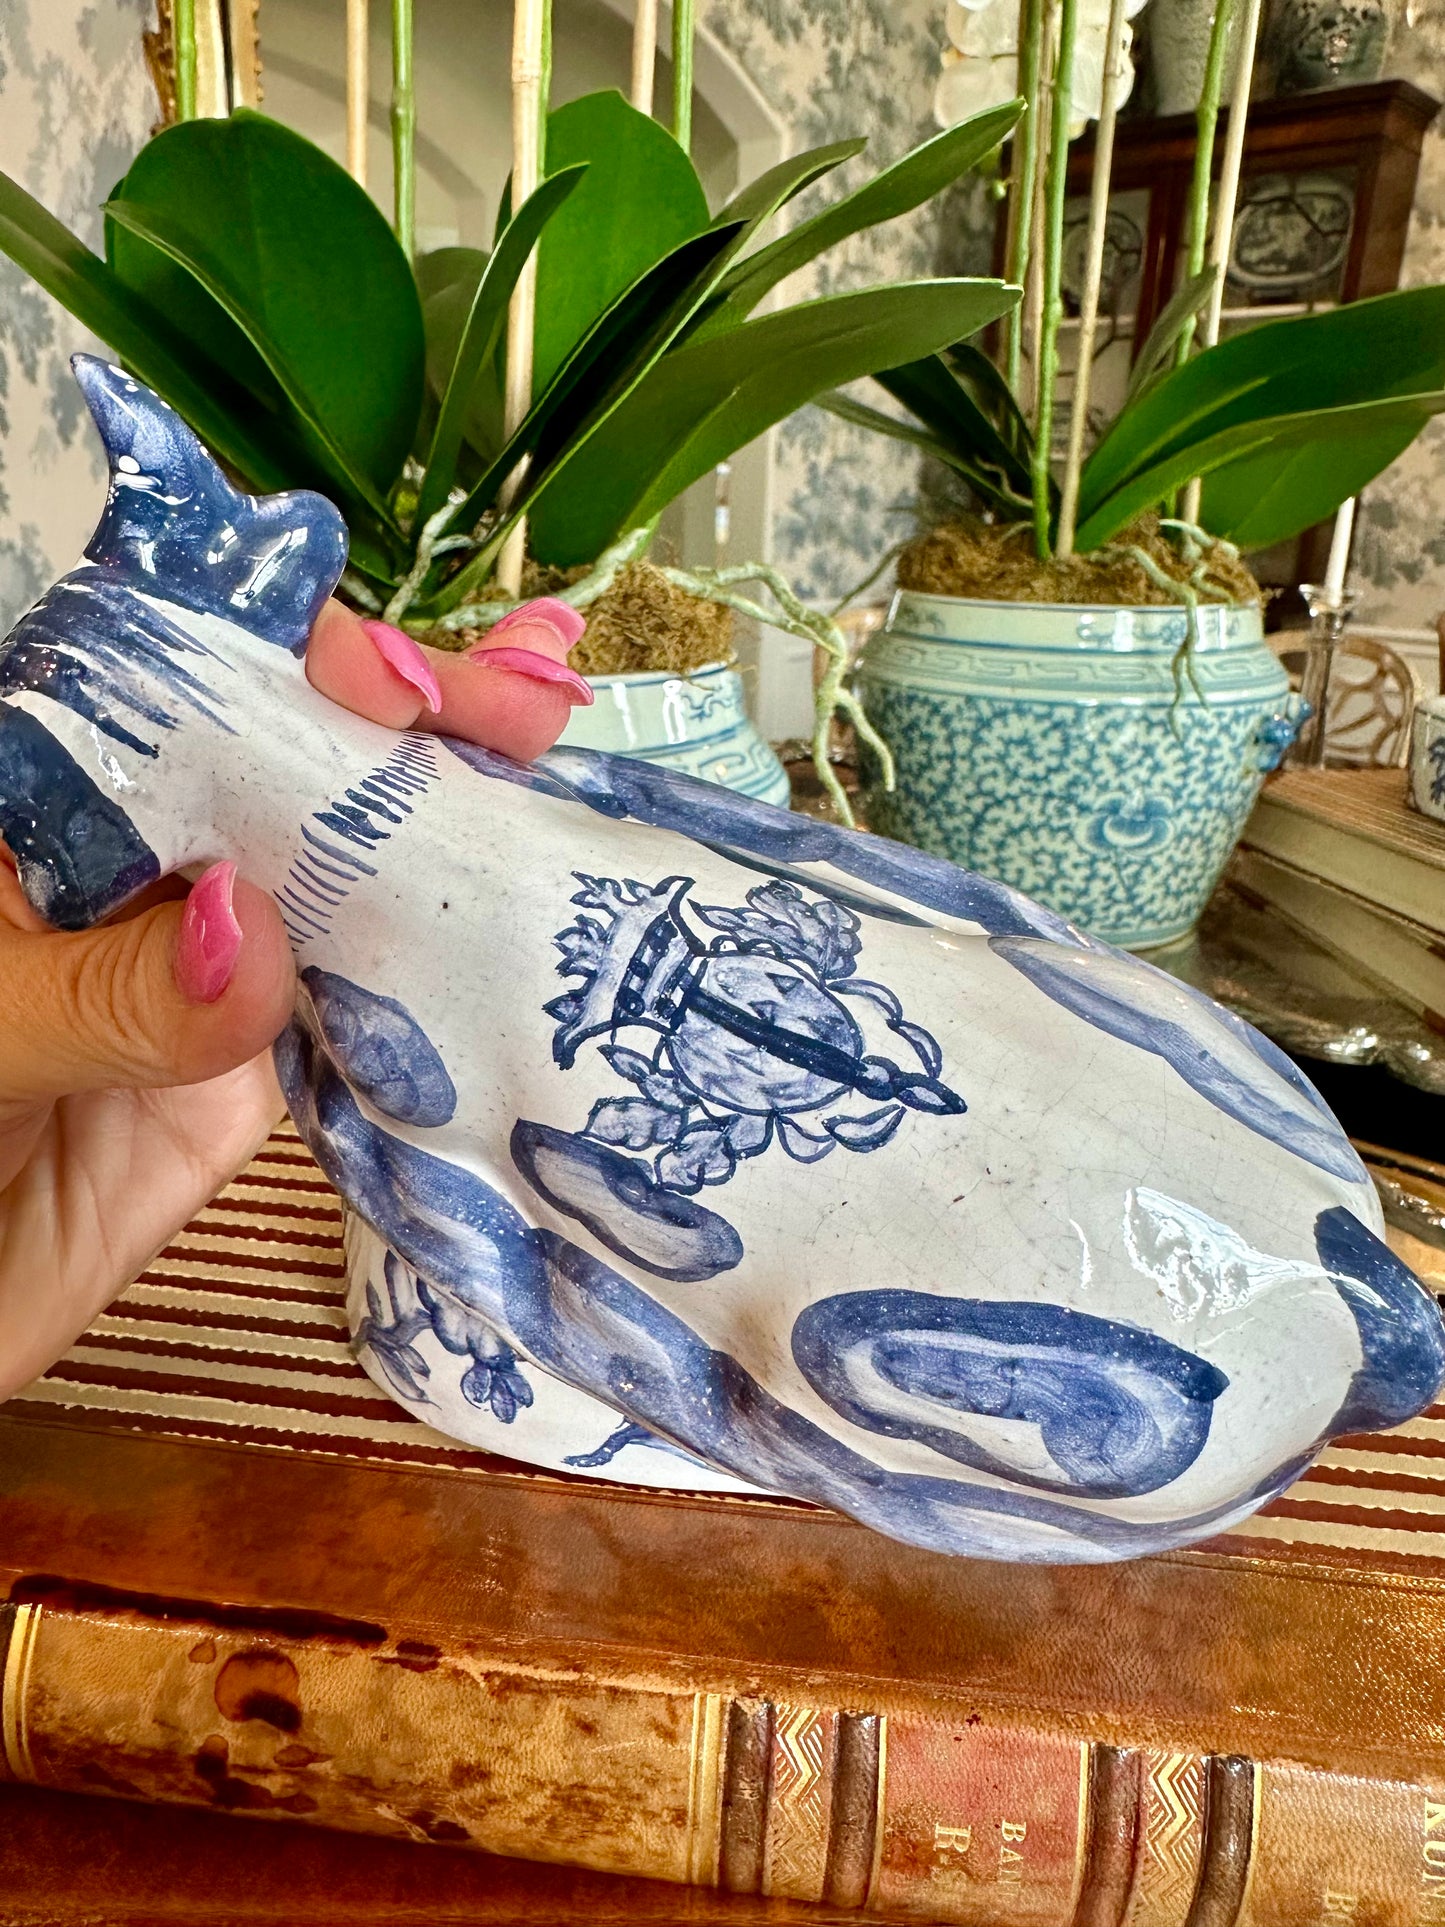 Darling Hand painted Blue & White Portugal Cow Covered Dish